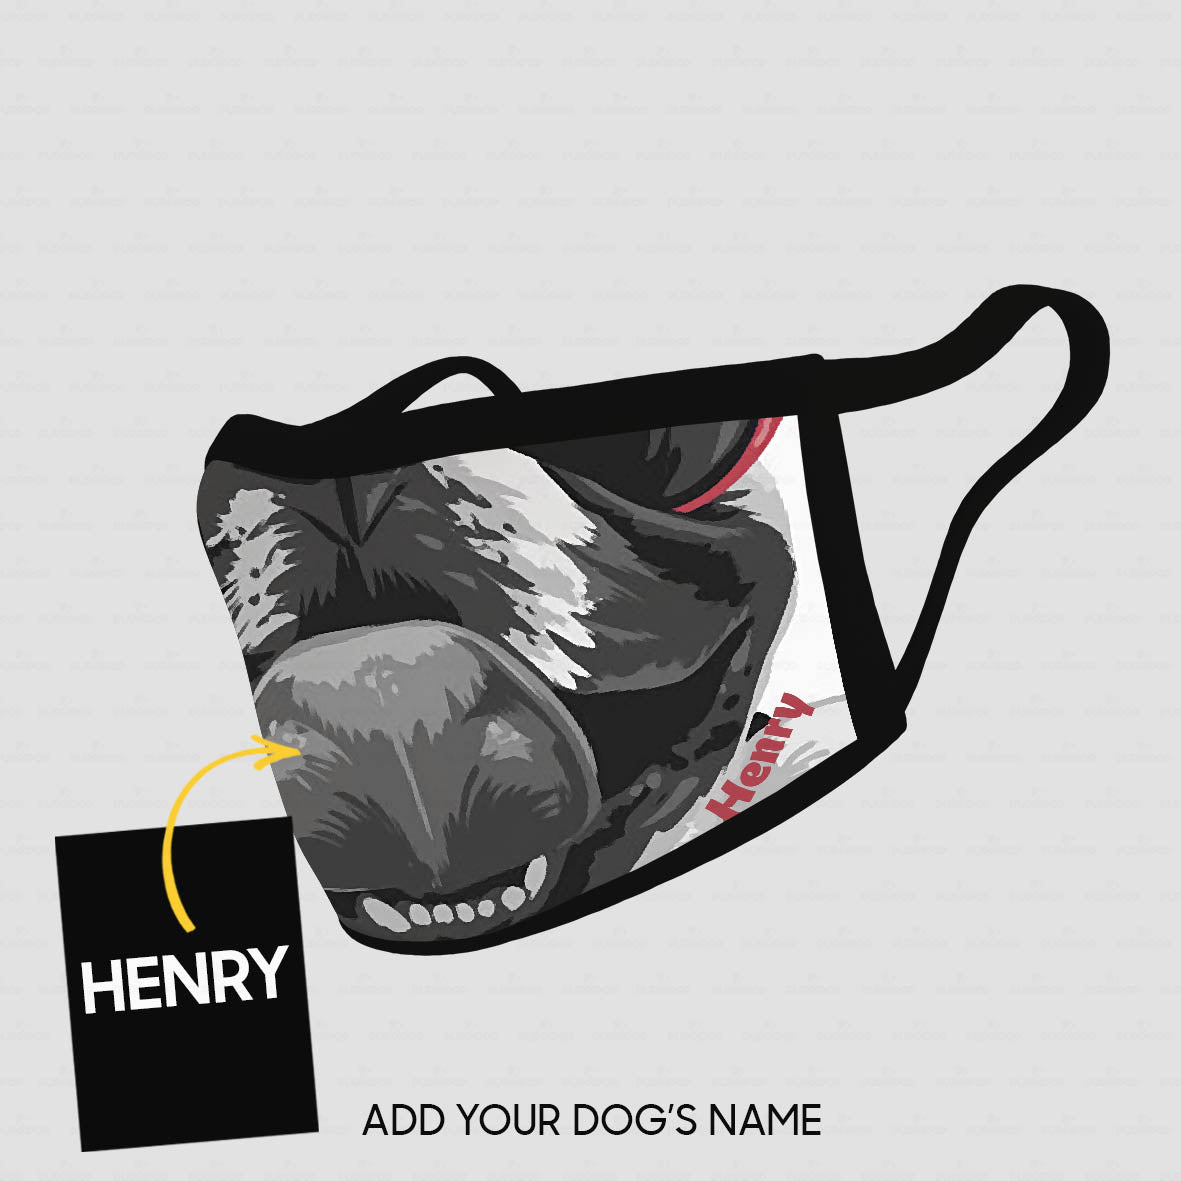 Personalized Dog Gift Idea - Cool Dog With Red Sunglasses Zoom In For Dog Lovers - Cloth Mask